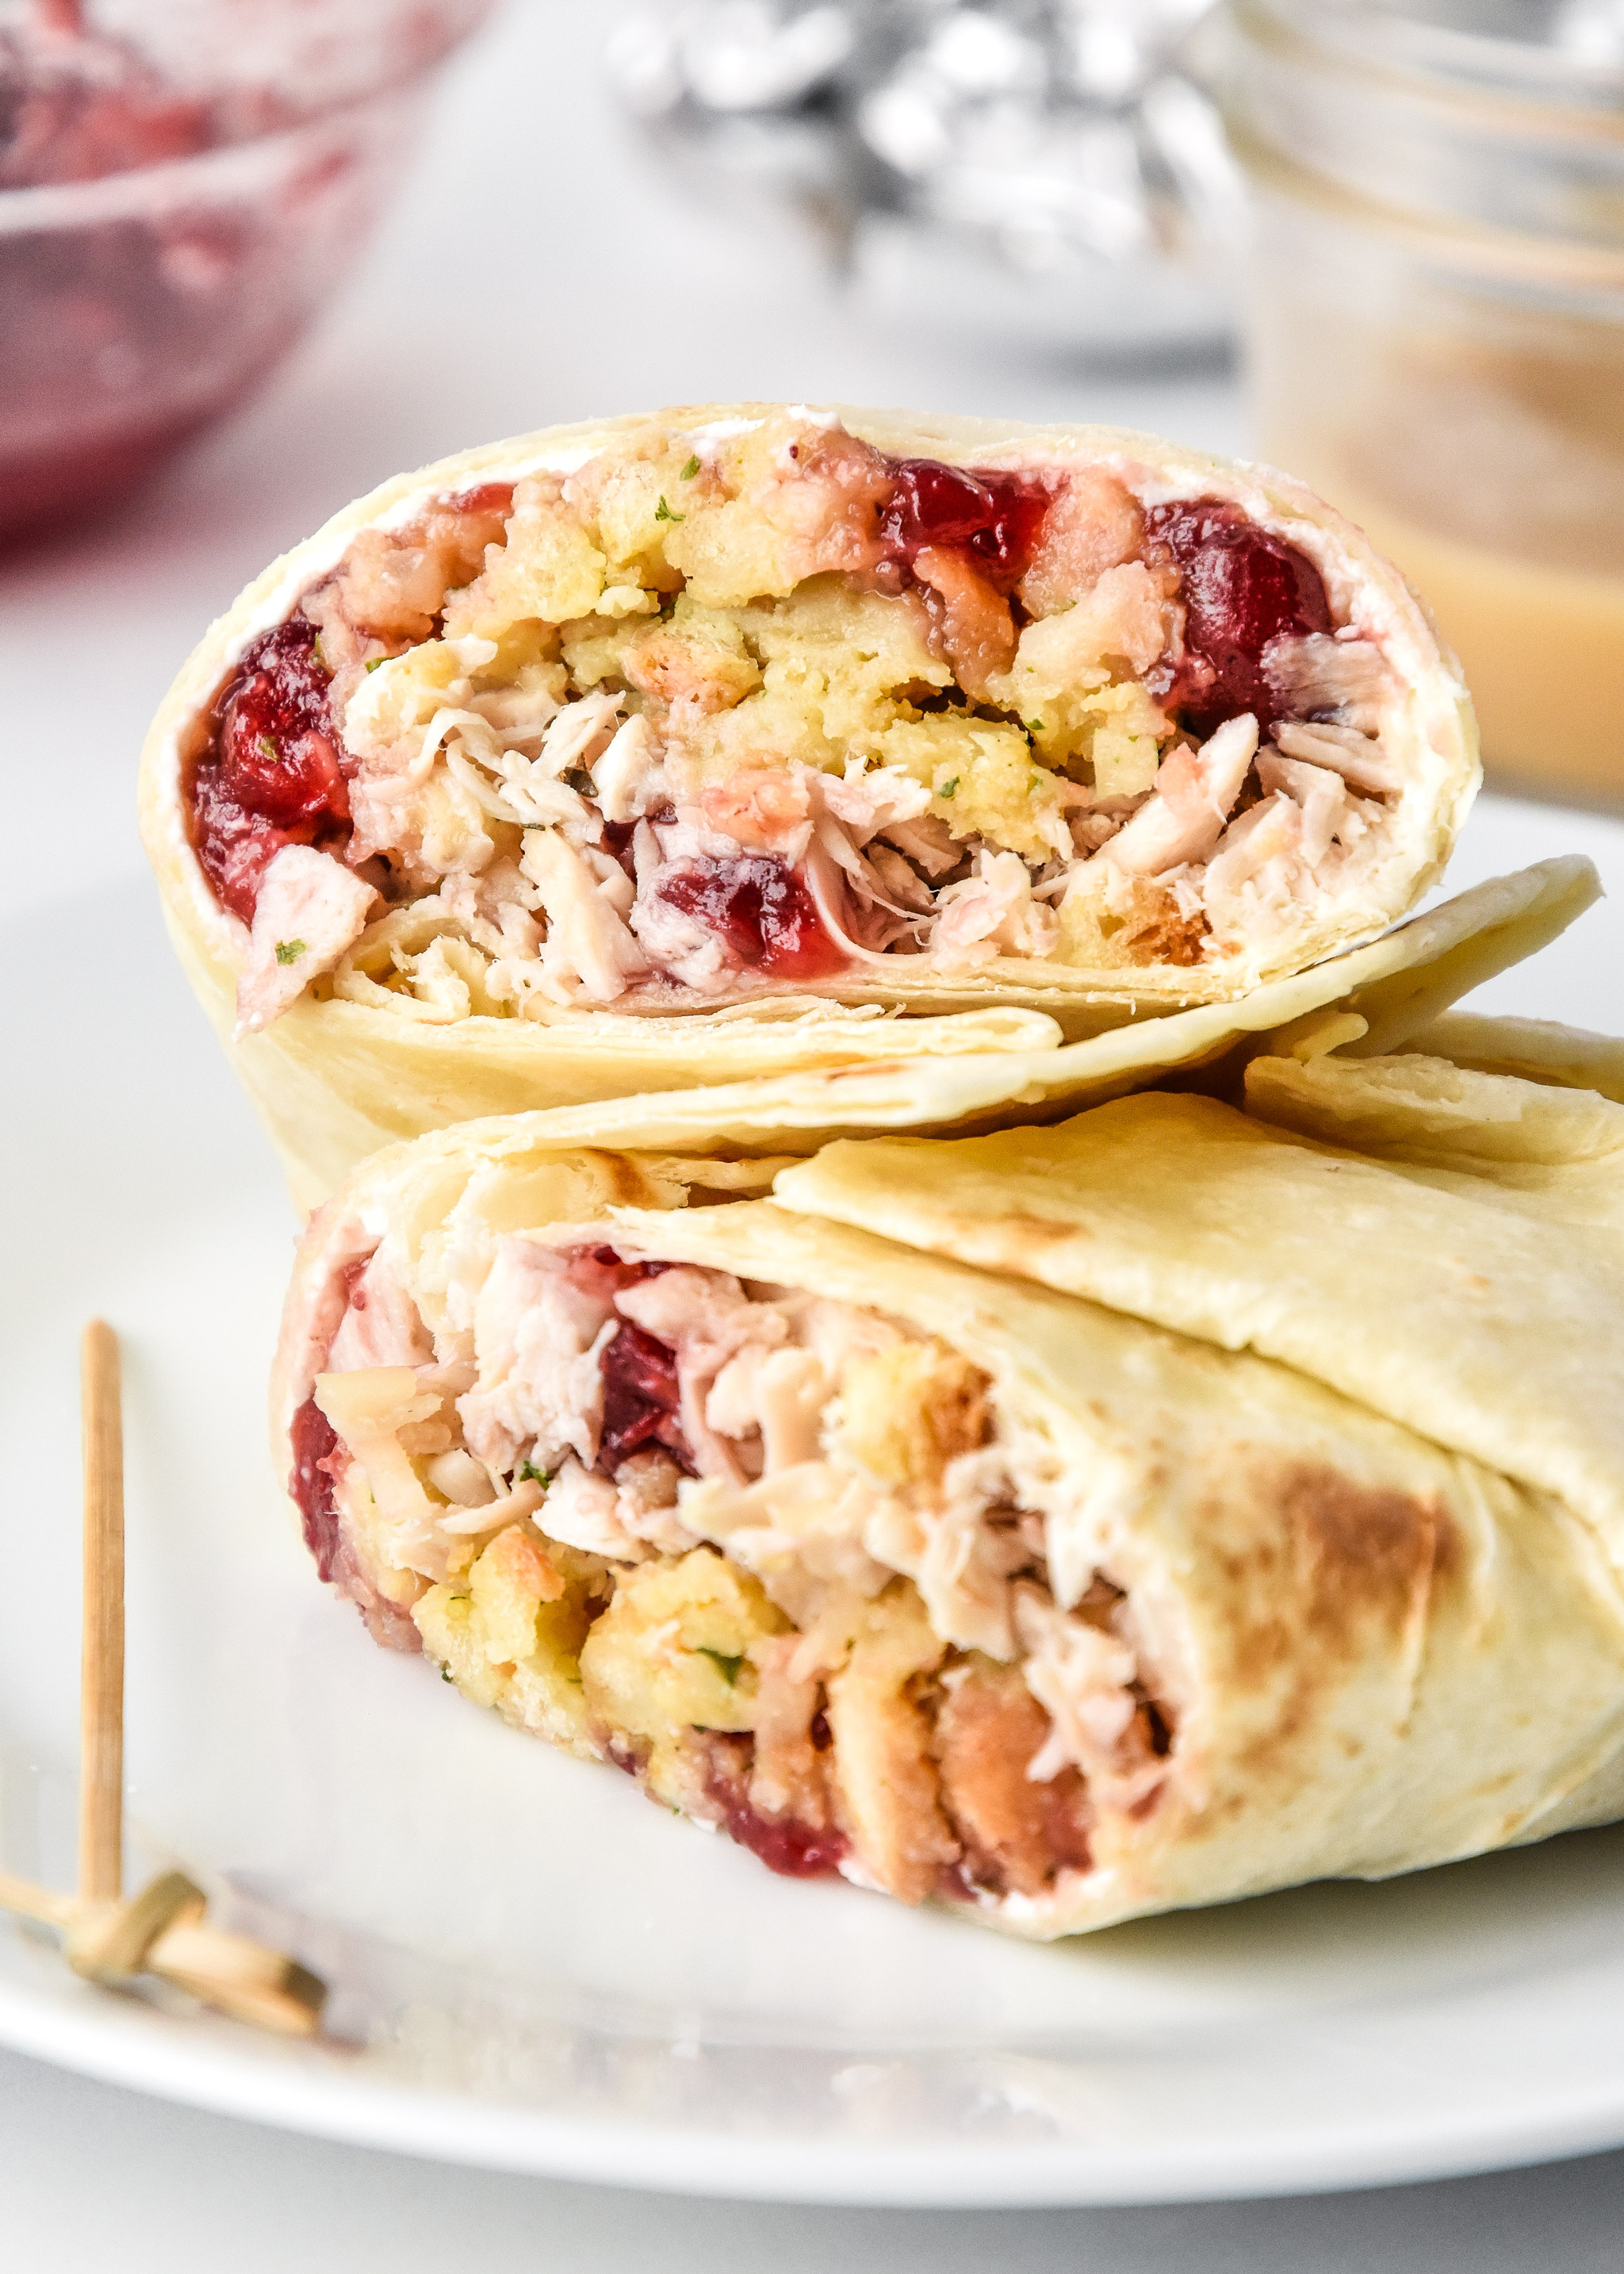 turkey gobbler wrap made with leftover ingredients cut in half on a plate